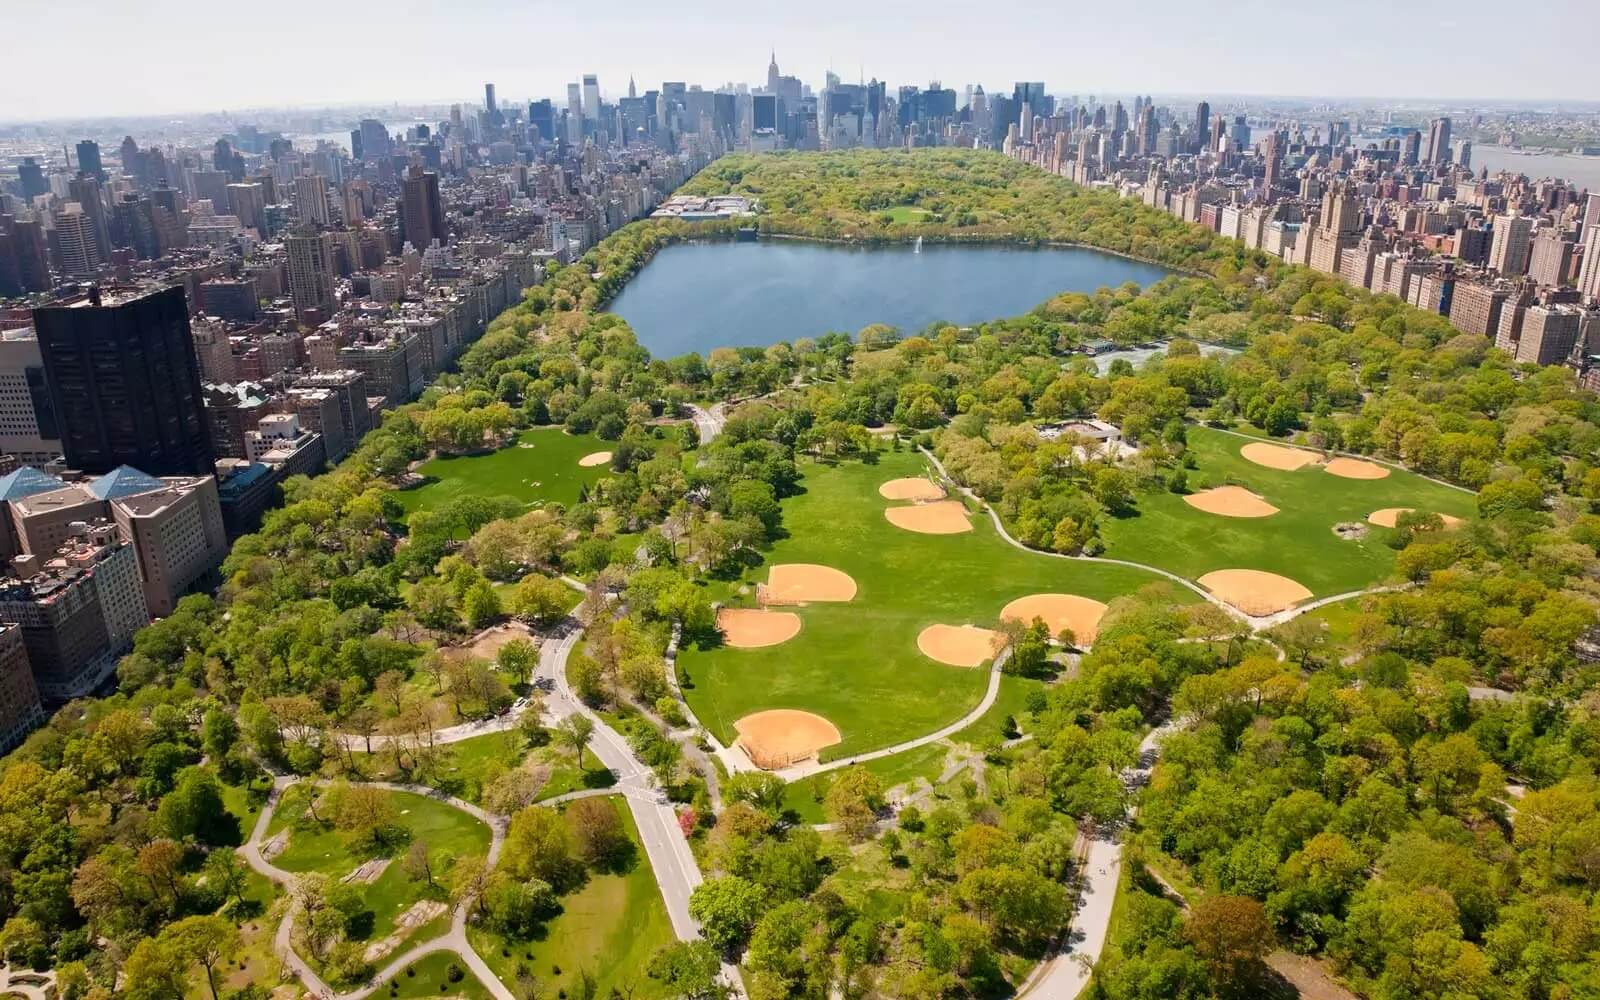 Central Park, Manhattan New York, NY - Aerial view in Summer of all of Central Park and the encircling skyline of buildings.